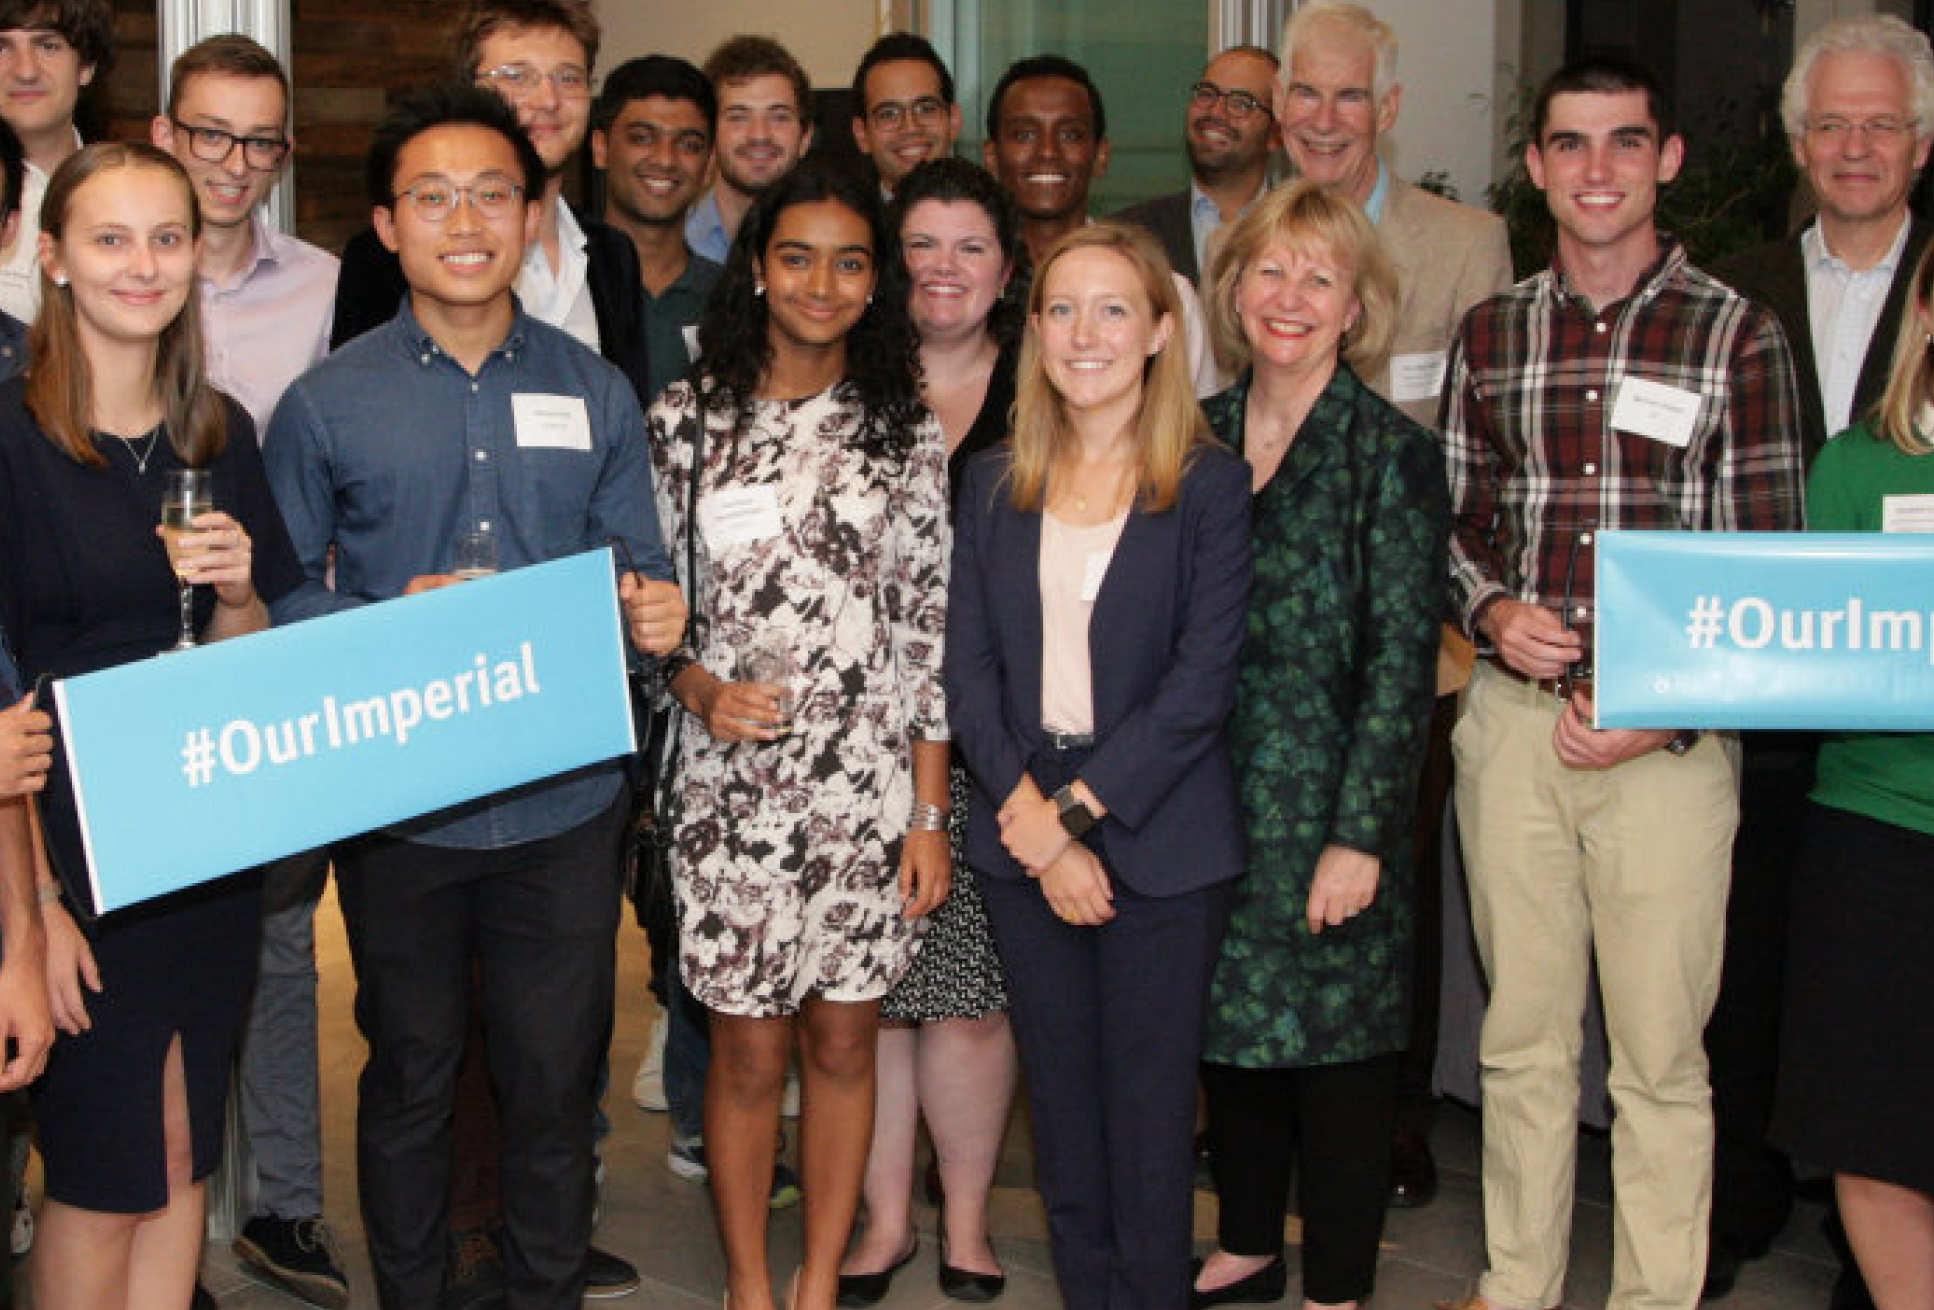 Imperial and MIT launched a student exchange last year